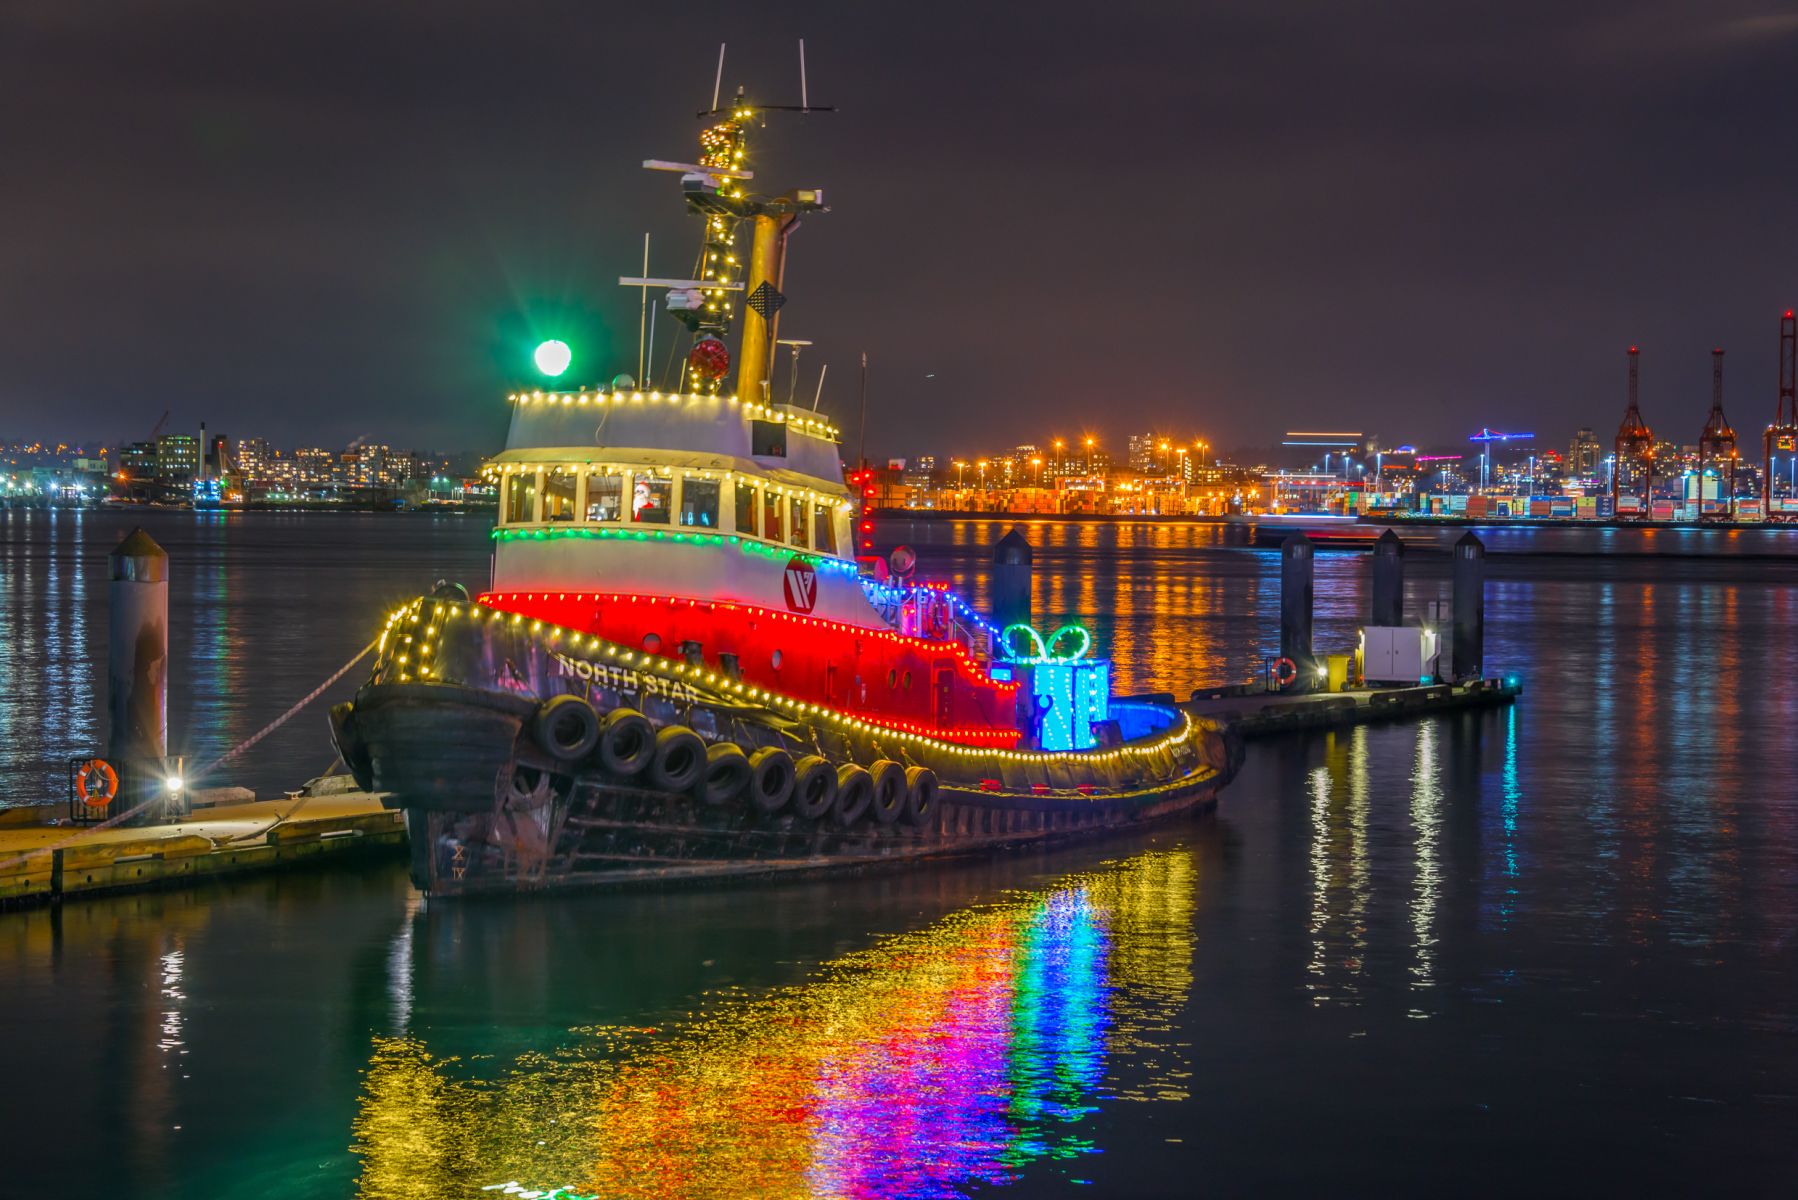 Tug boat decorated in Christmas lights